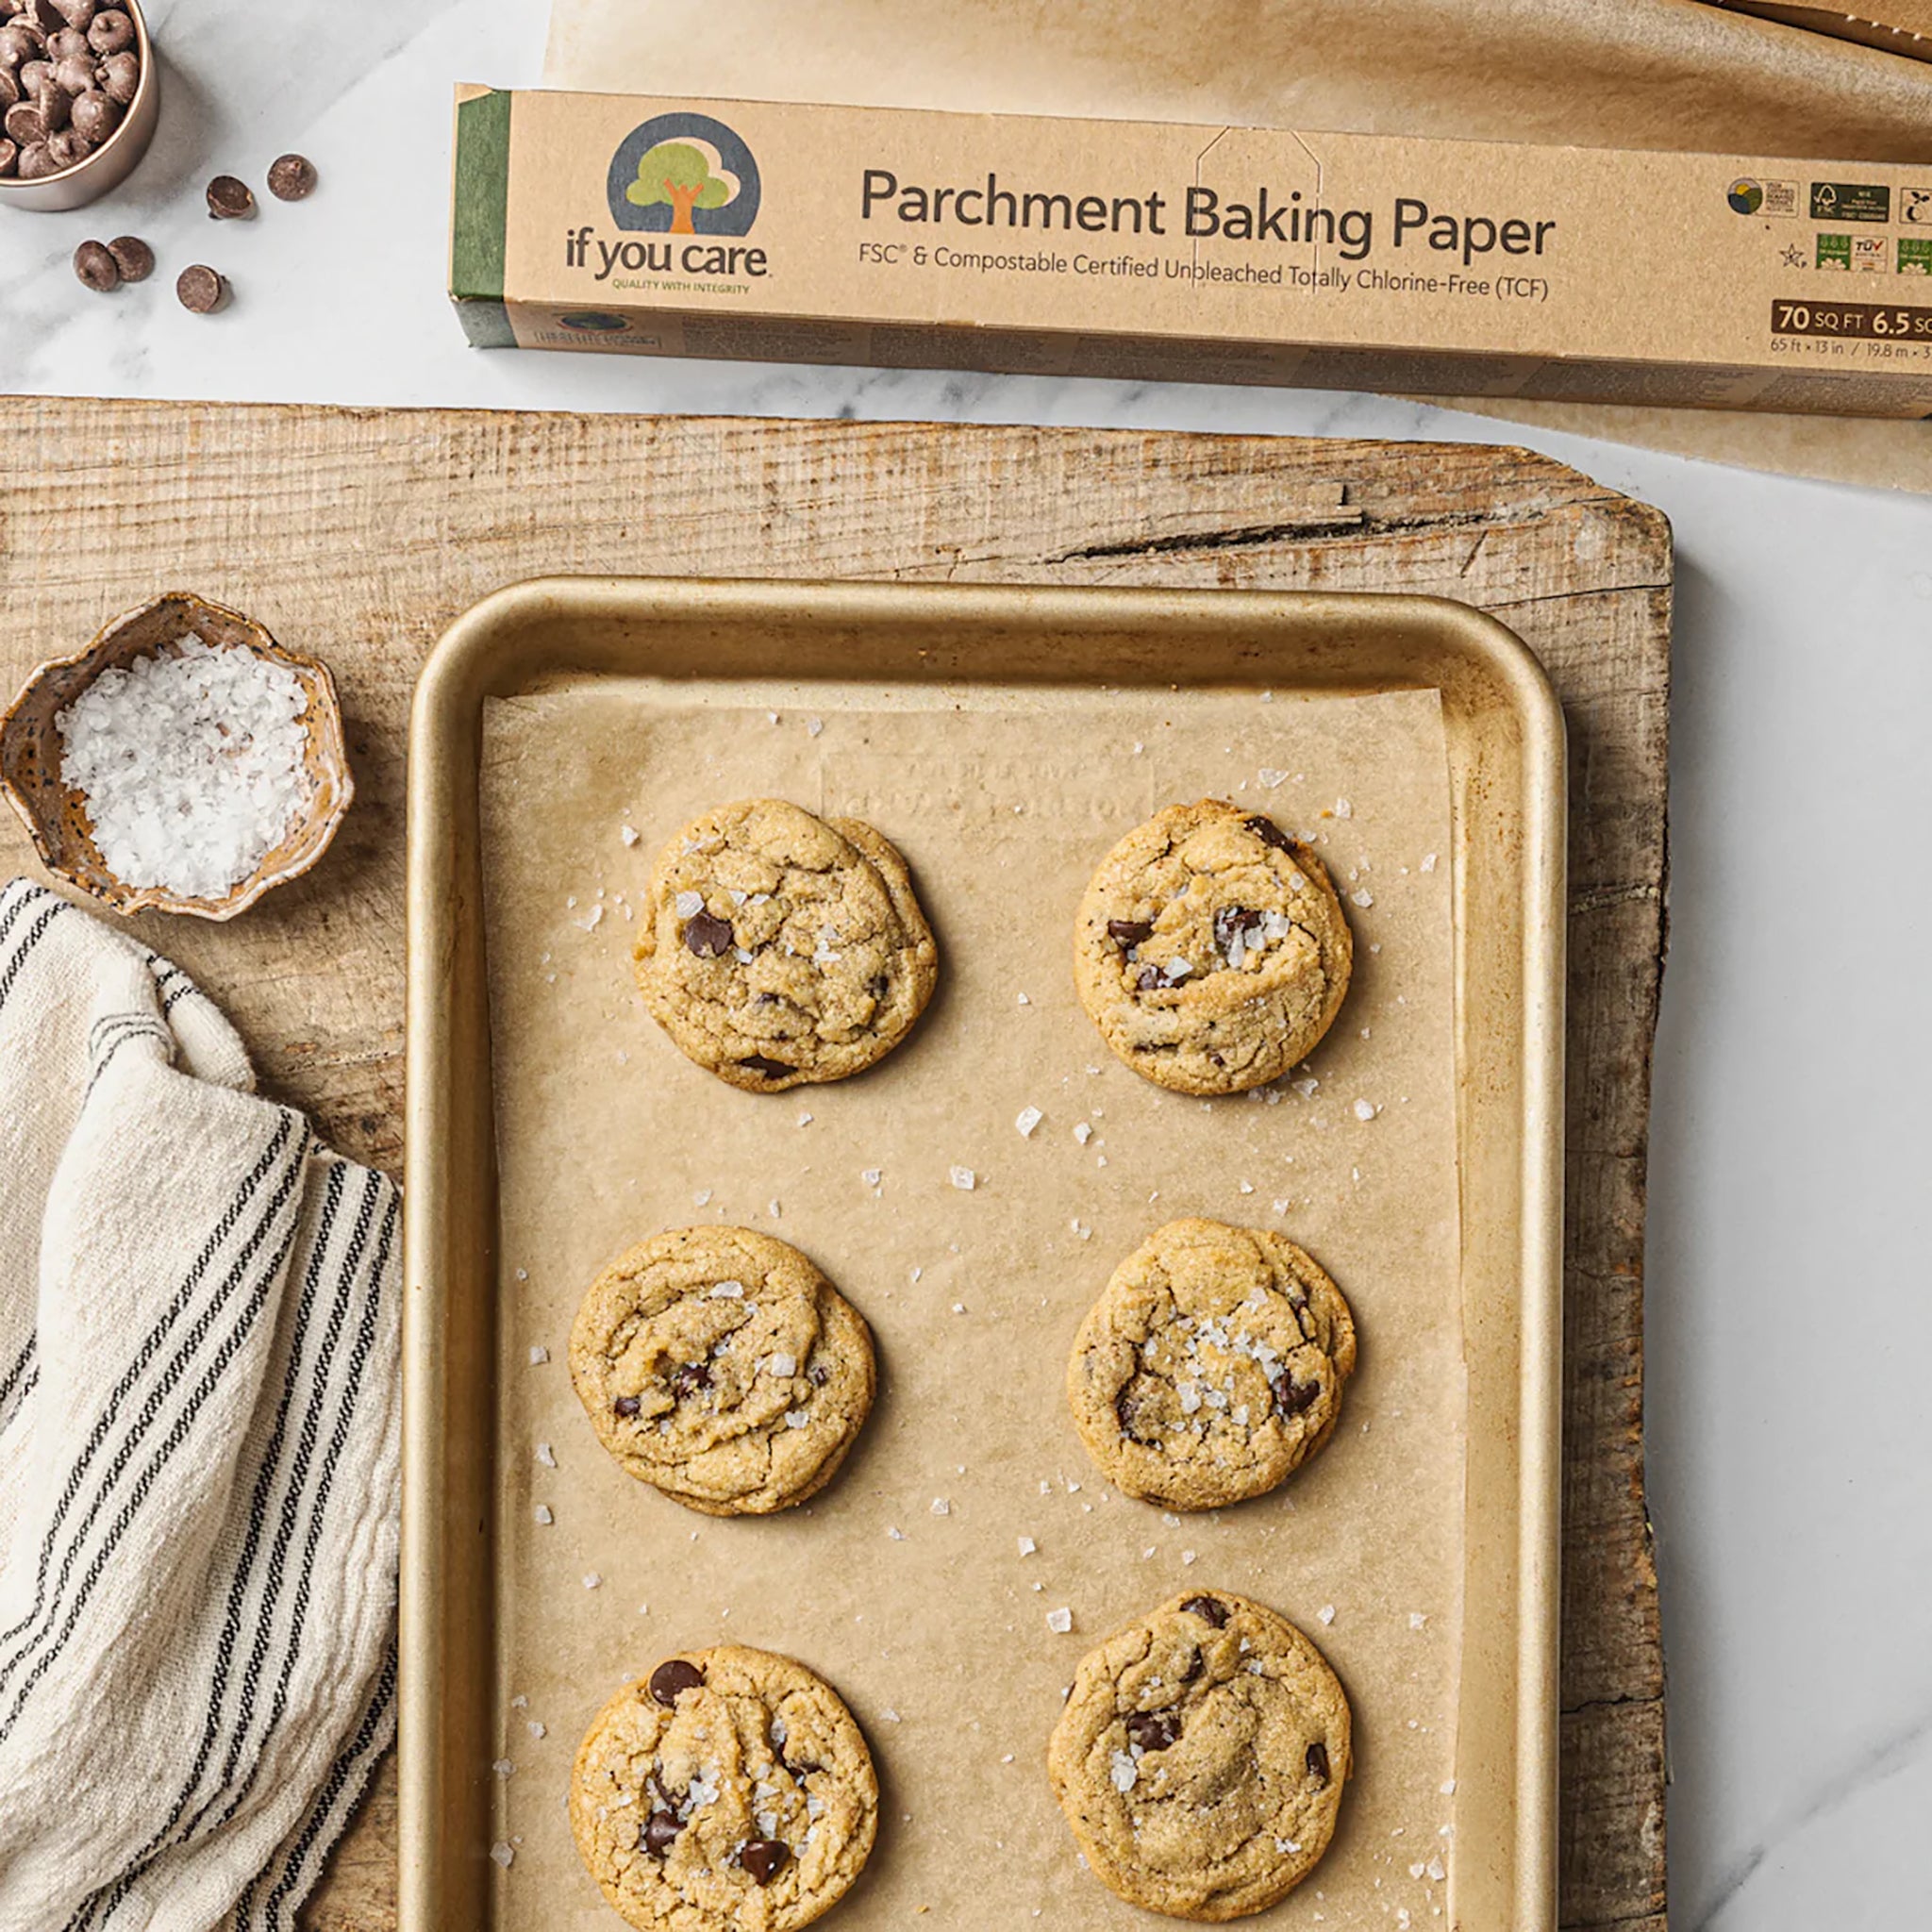 Parchment Baking Paper Roll on Baking Tray